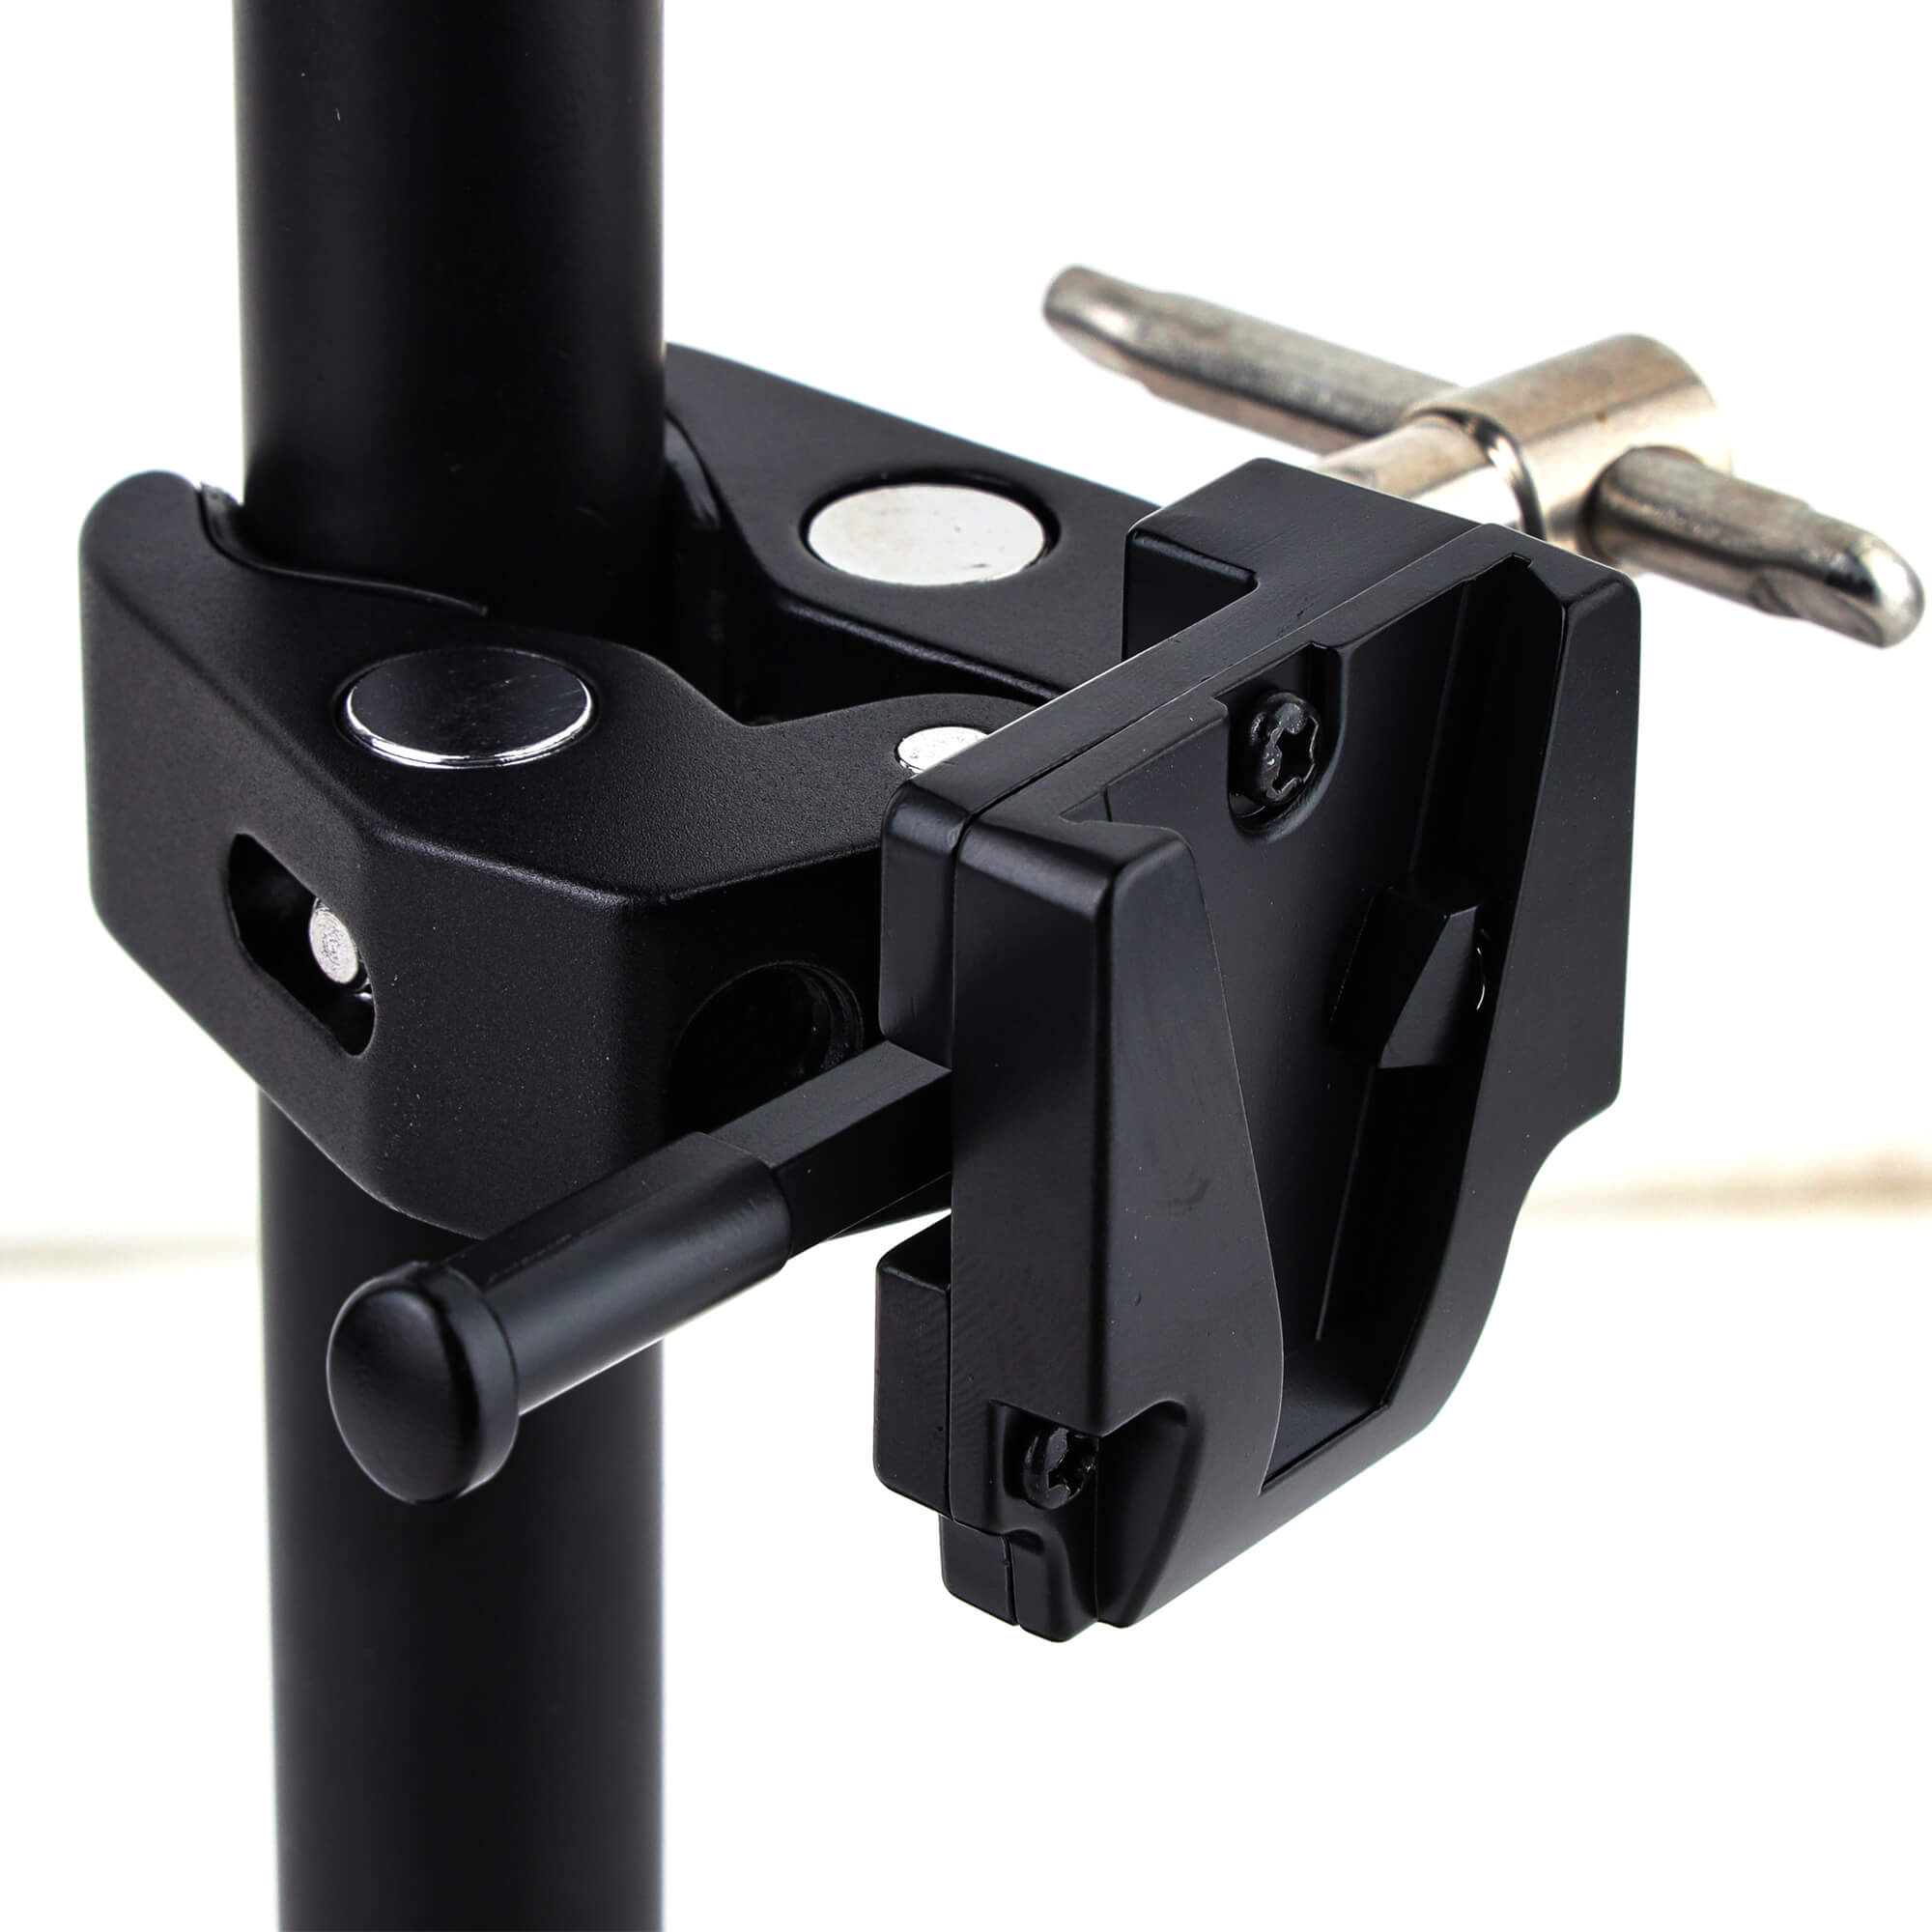 v mount with clamp